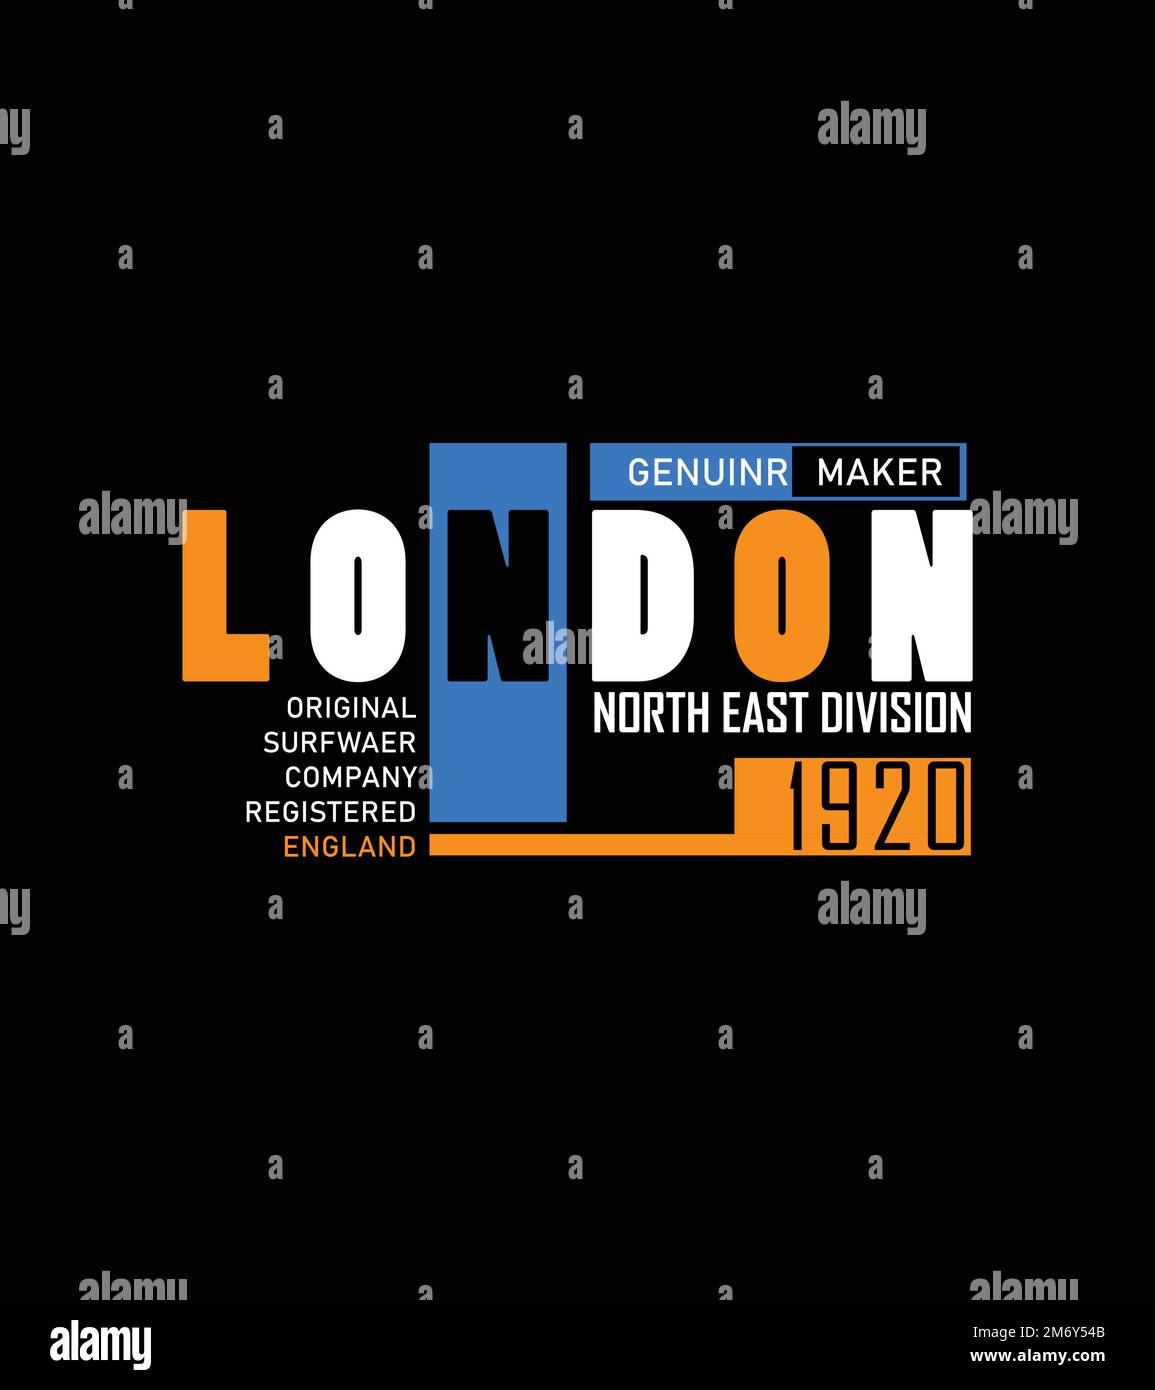 London Company Typography Graphic Design For Print T Shirt Stock Vector